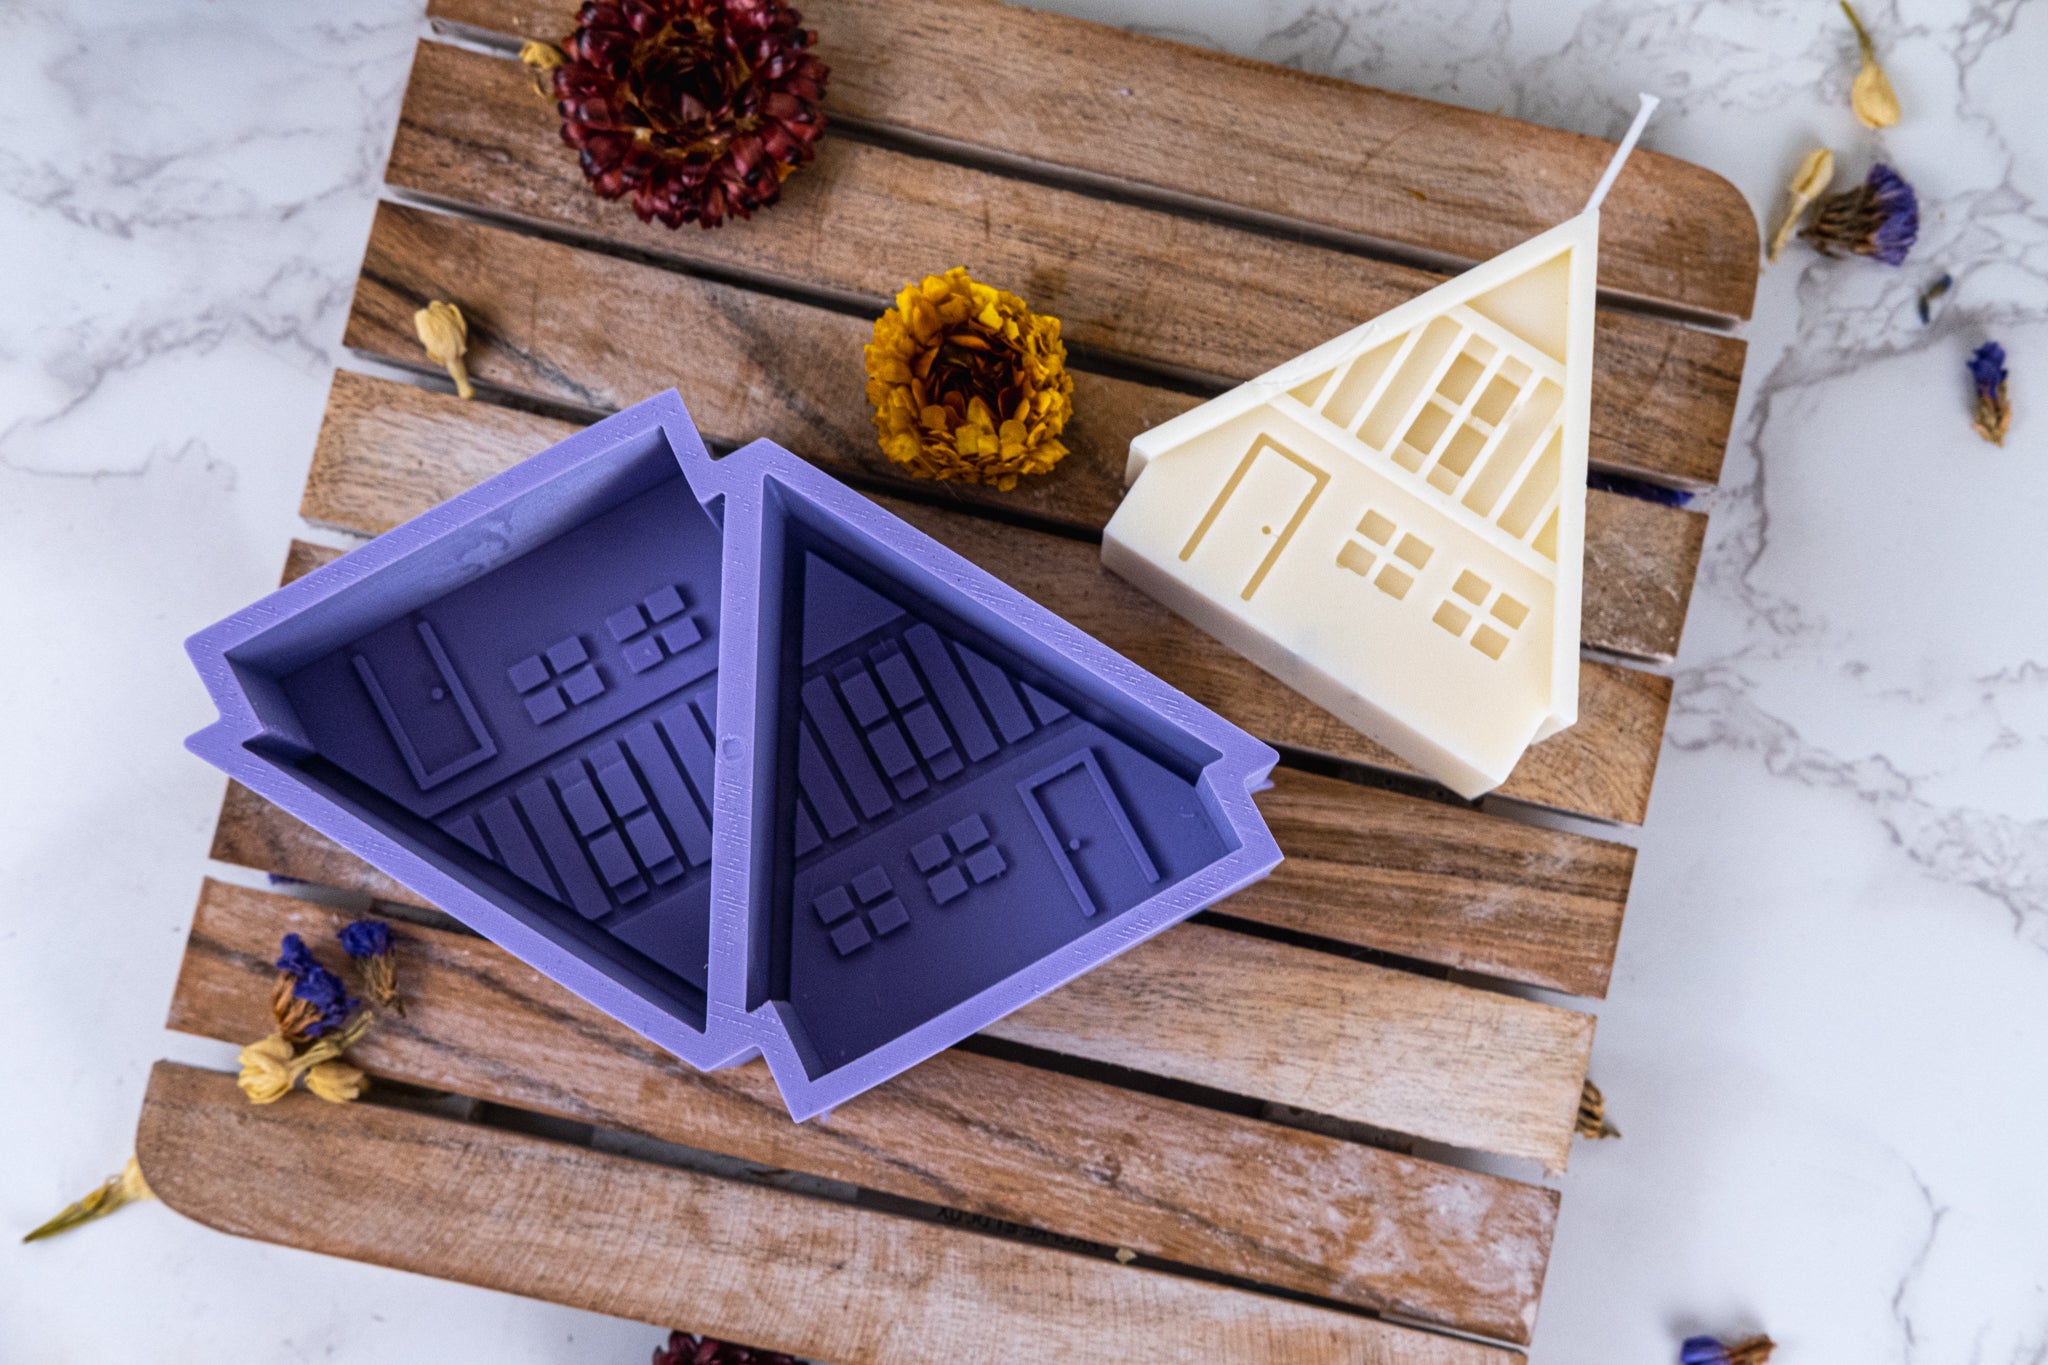 Chalet Silicone Mold for Candles, Soap, Crafts